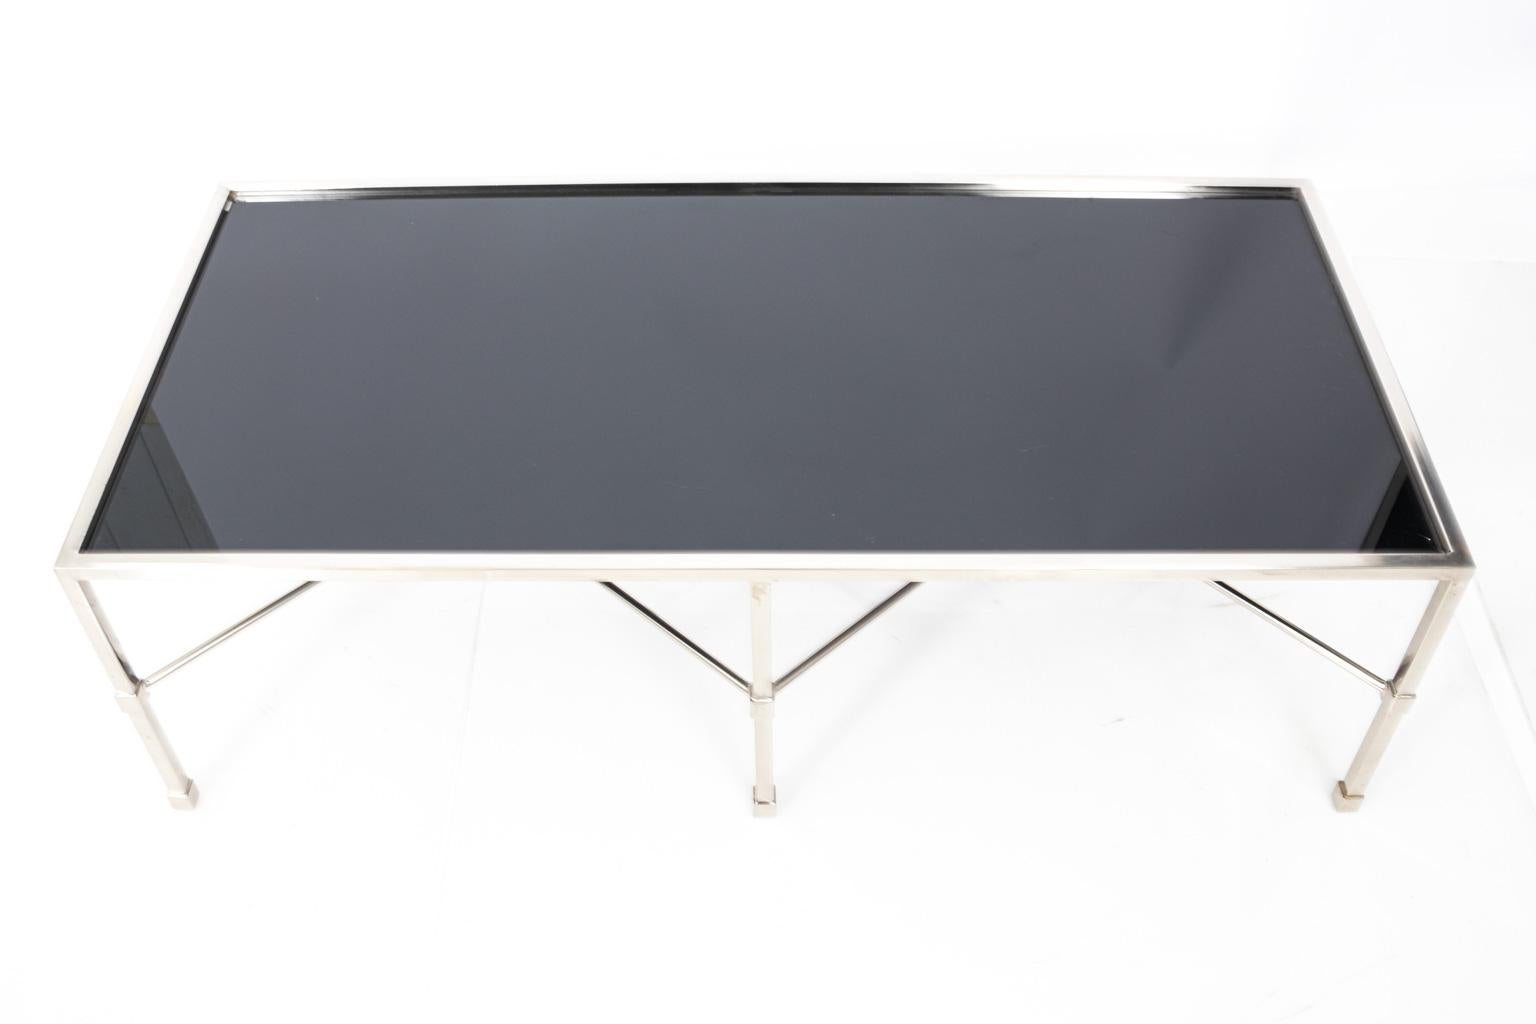 Late 20th Century Chrome and Black Glass Coffee Table